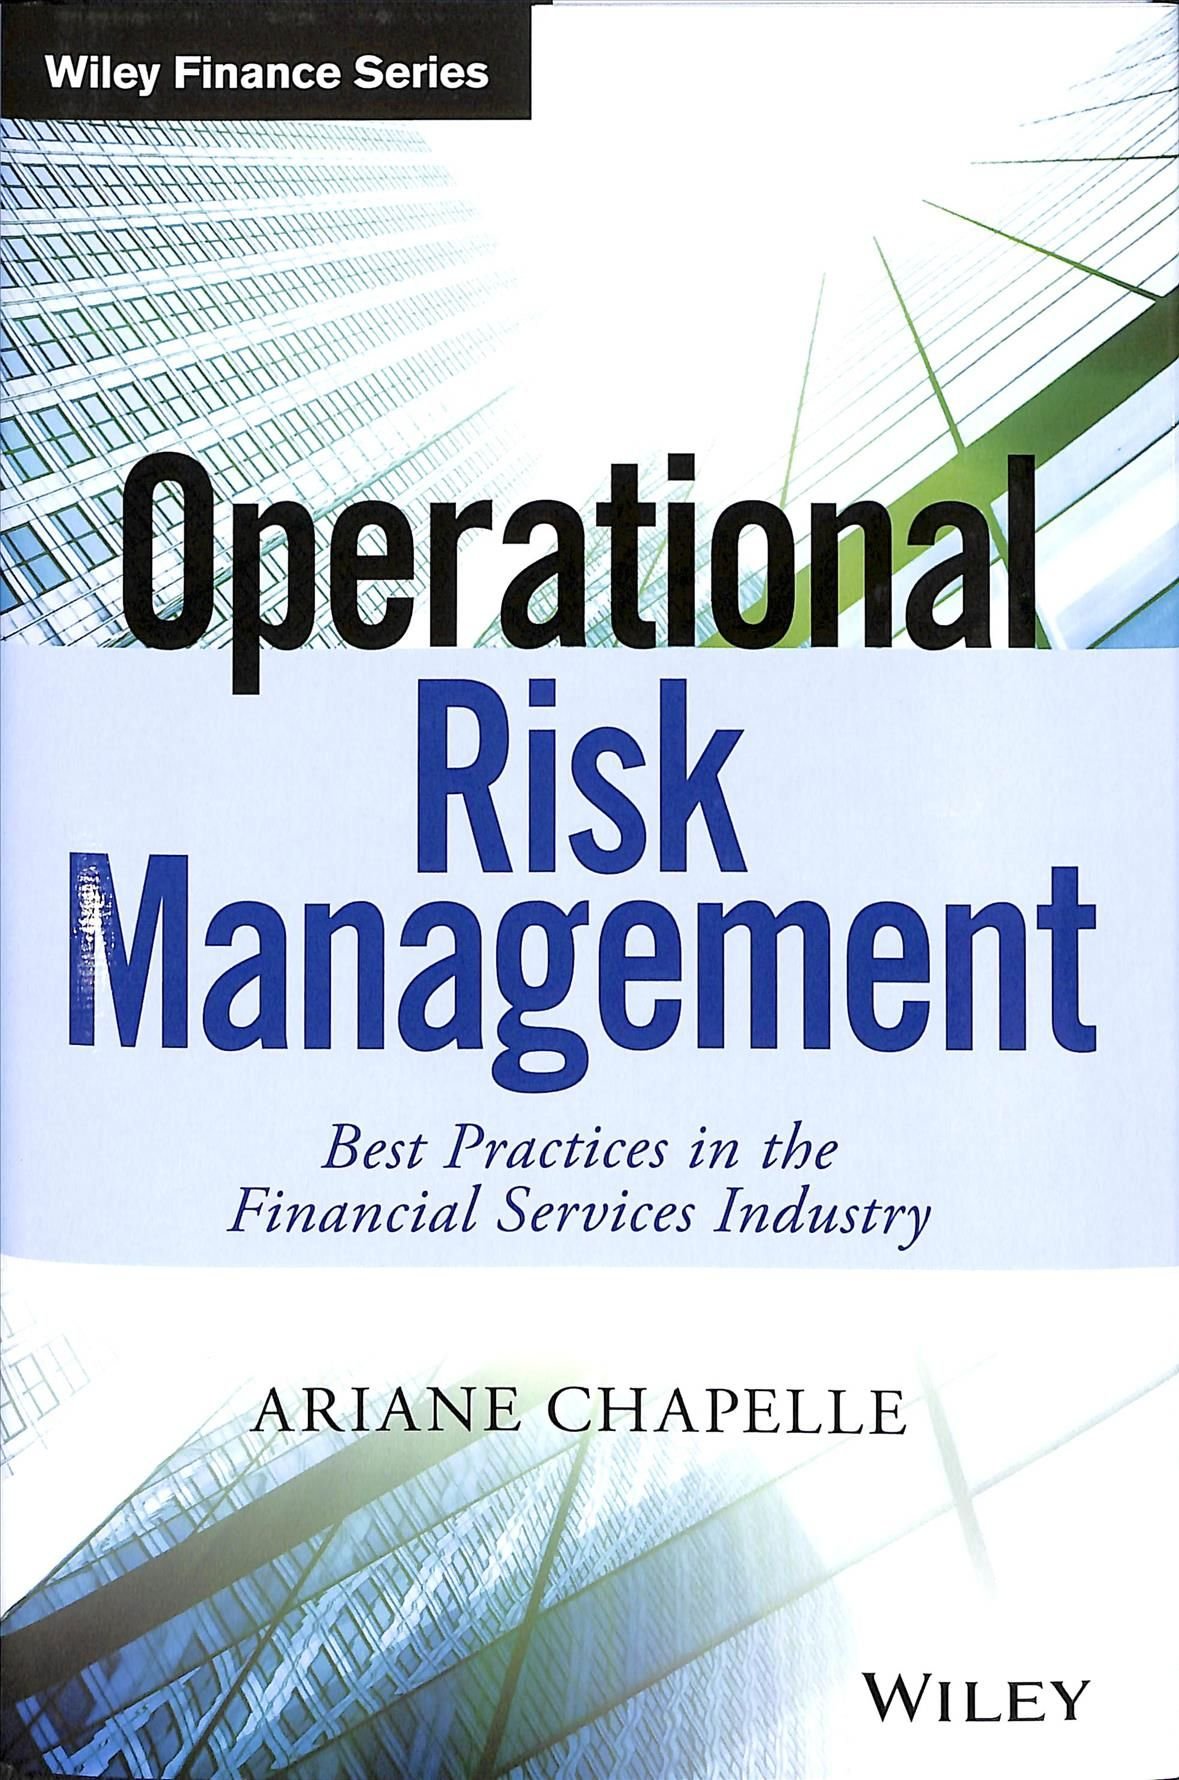 Operational Risk Management - Best Practices in the Financial Services Industry